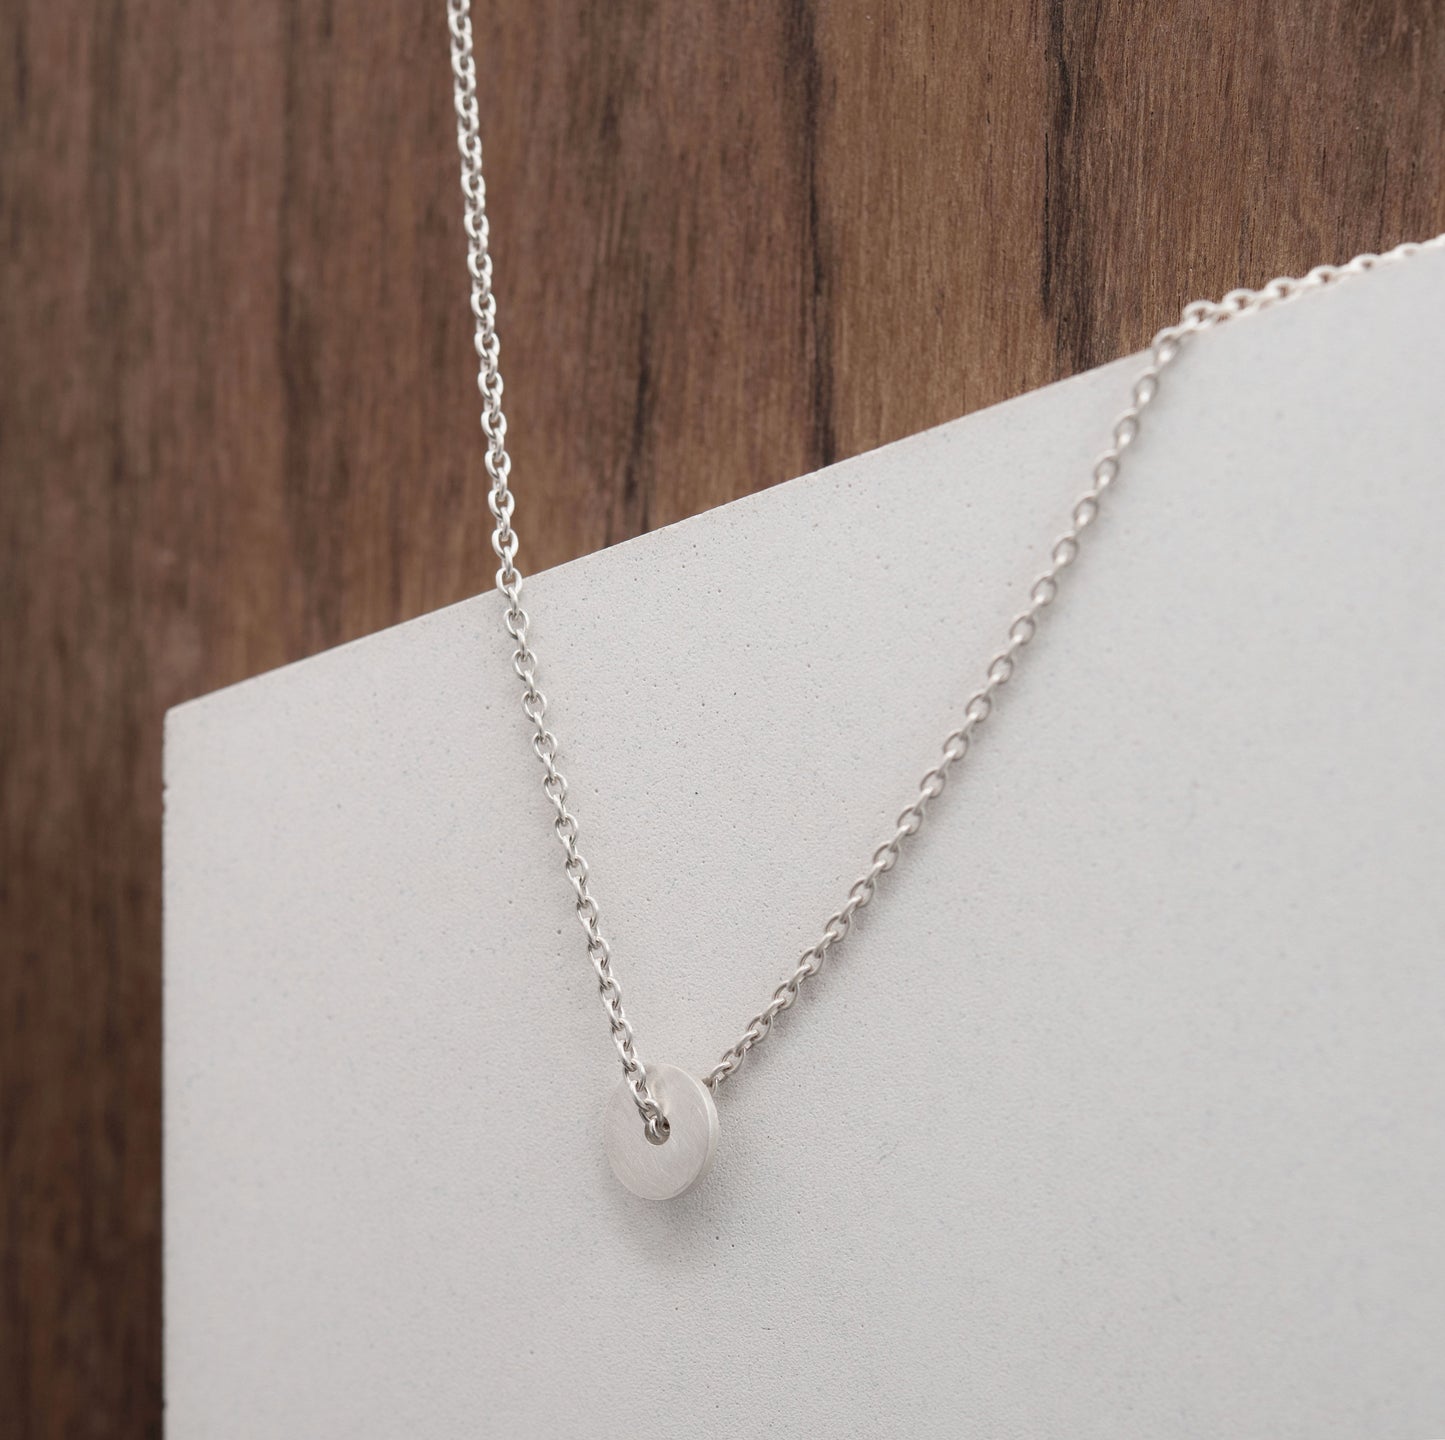 Dainty DOT necklace N°16 in gold plated silver or silver